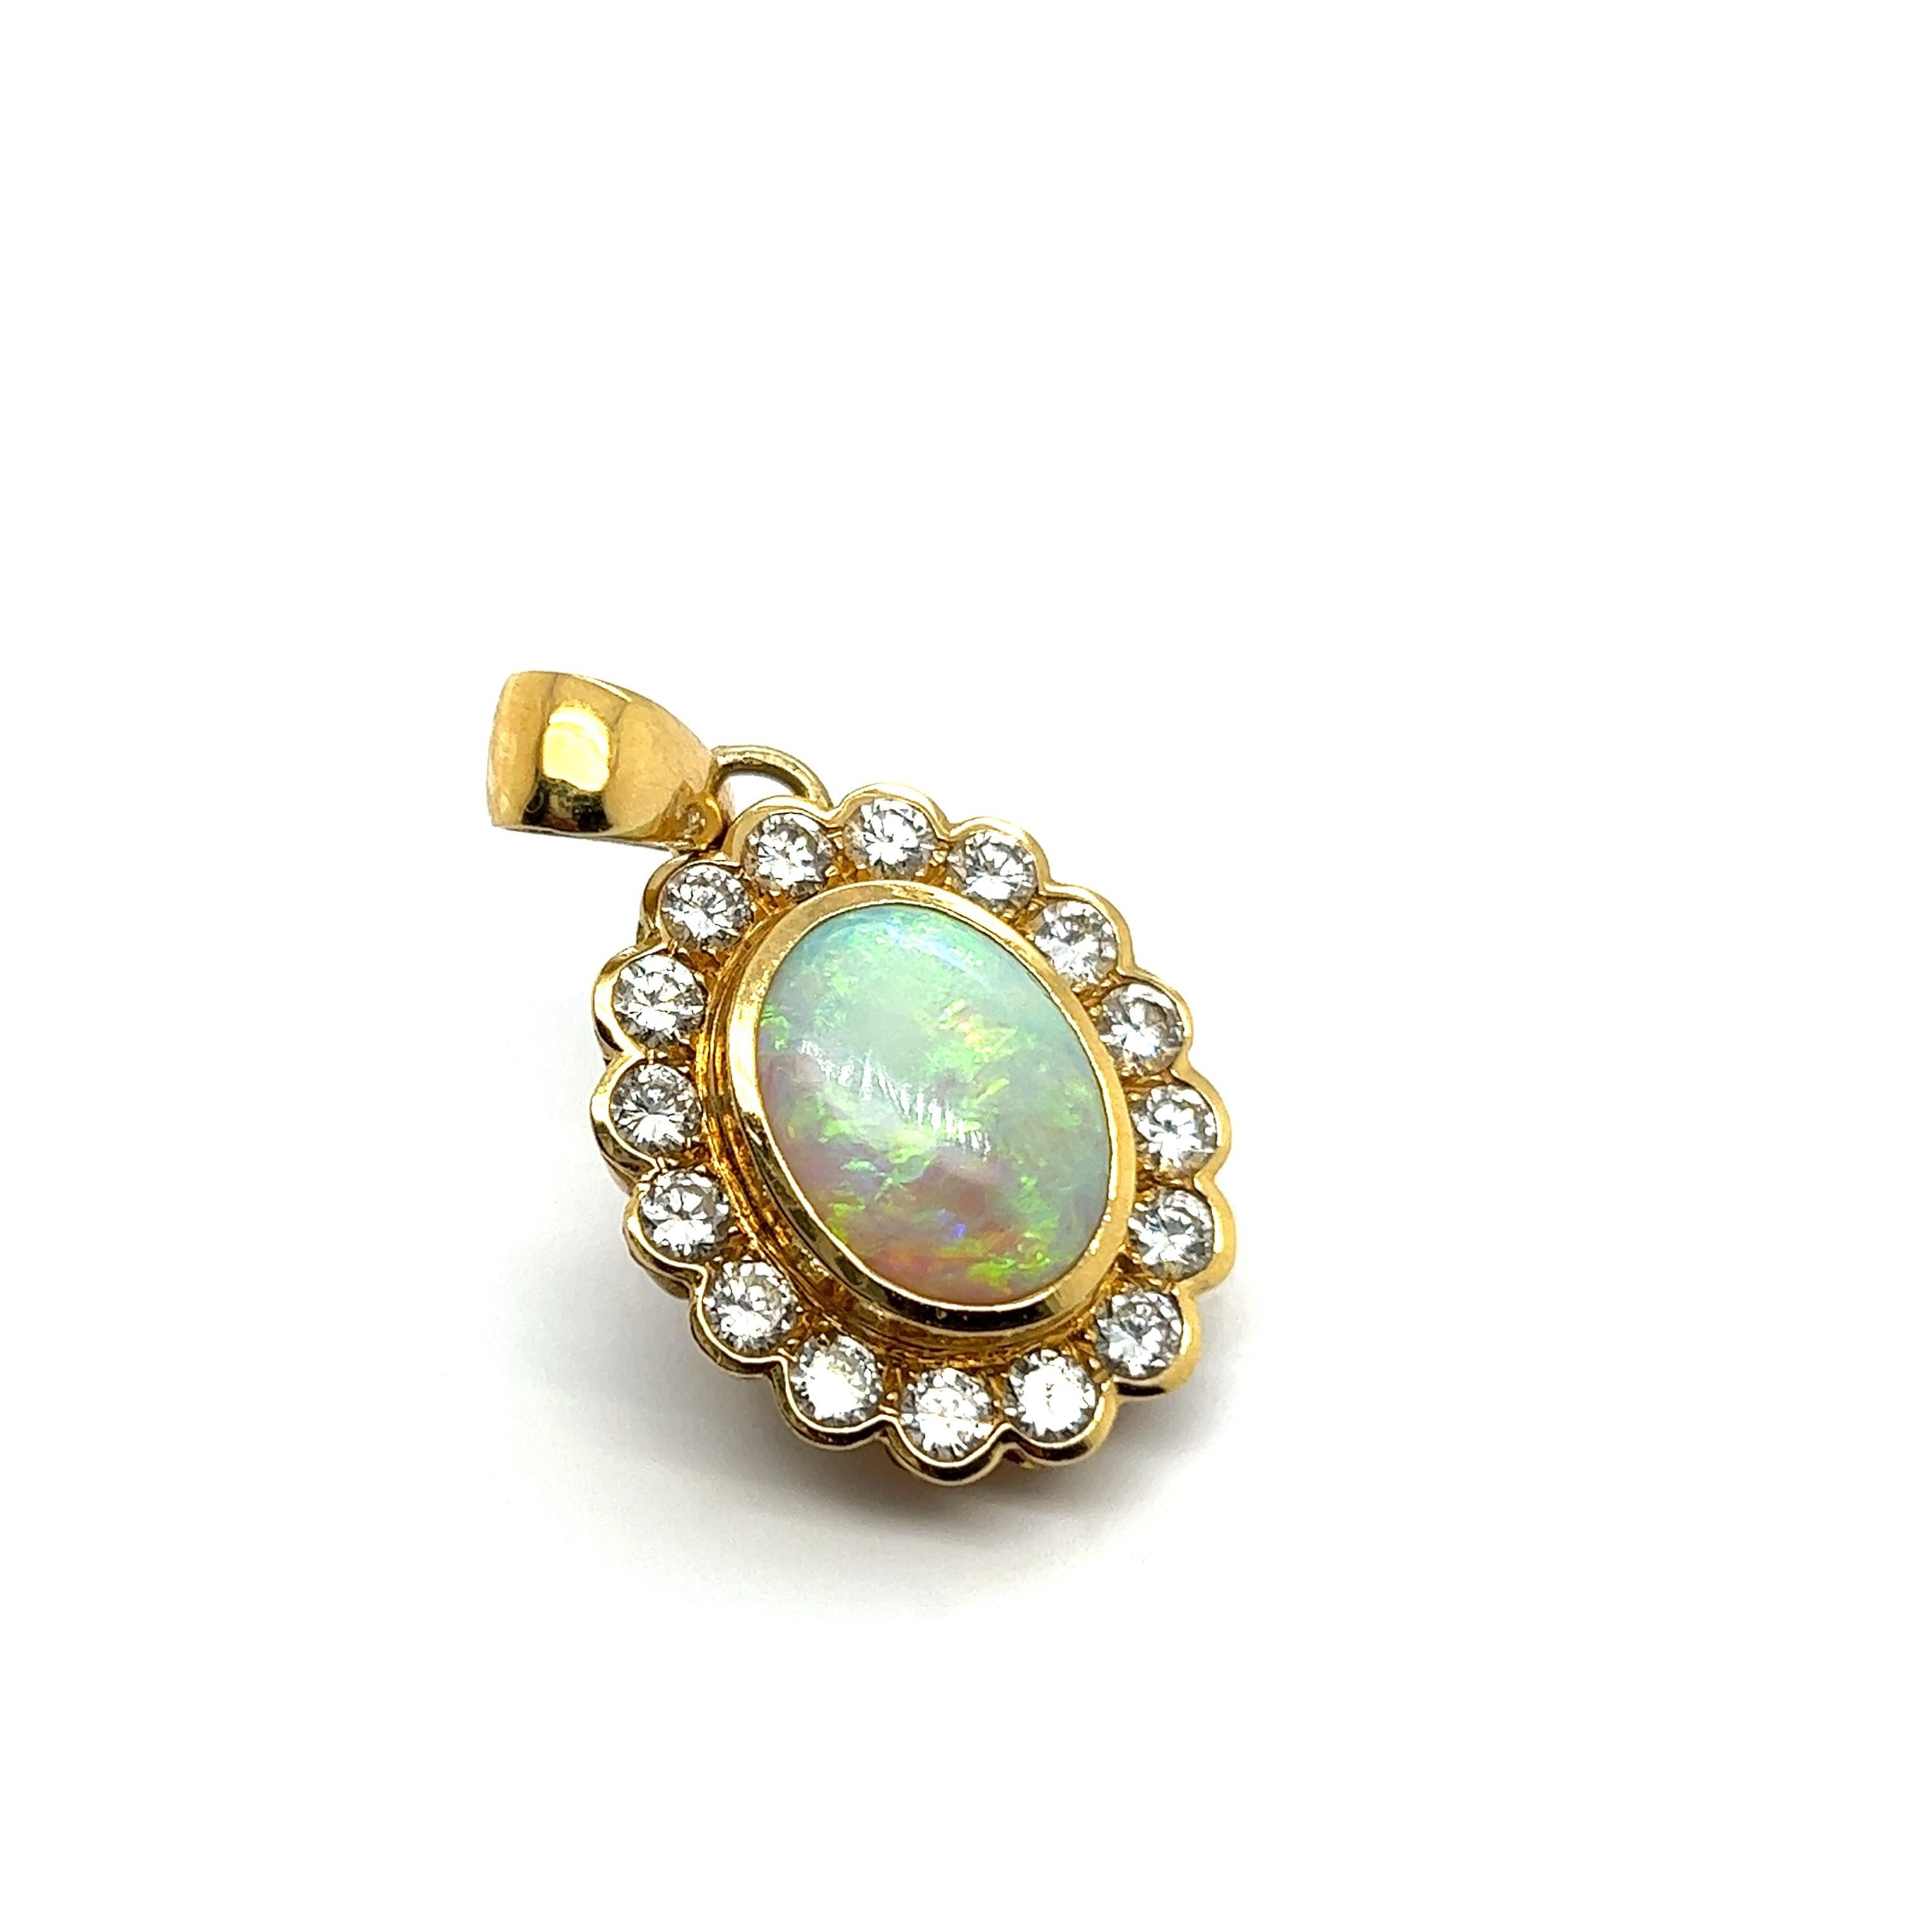 Presenting a white opal pendant in 18 Karat yellow gold is a luxurious and elegant piece of jewelry. 

The opal, with its milky white body tone, highlights a mesmerizing play-of-color with vibrant flashes of gold, green, blue, and violet. The opal